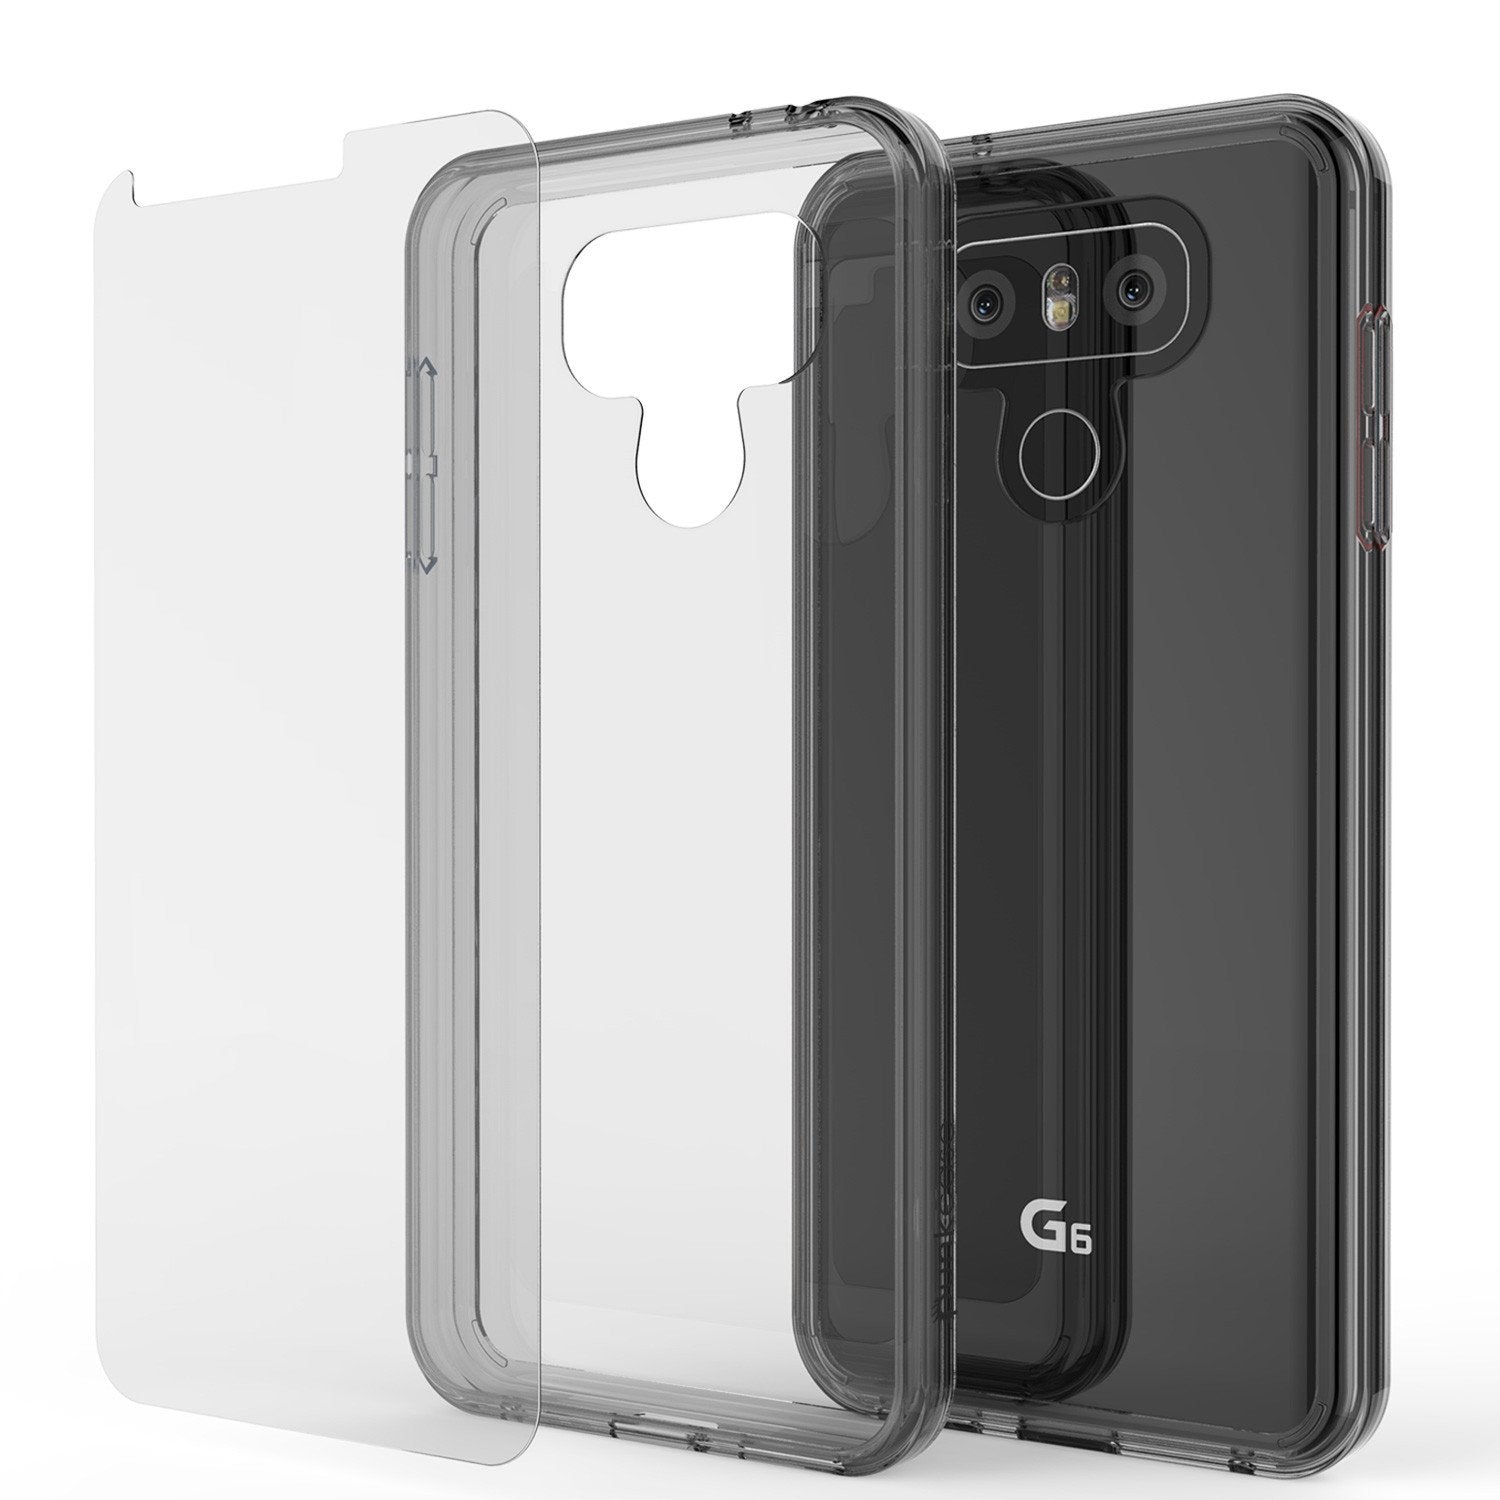 LG G6 Case Punkcase® LUCID 2.0 Crystal Black Series w/ PUNK SHIELD Screen Protector | Ultra Fit - PunkCase NZ